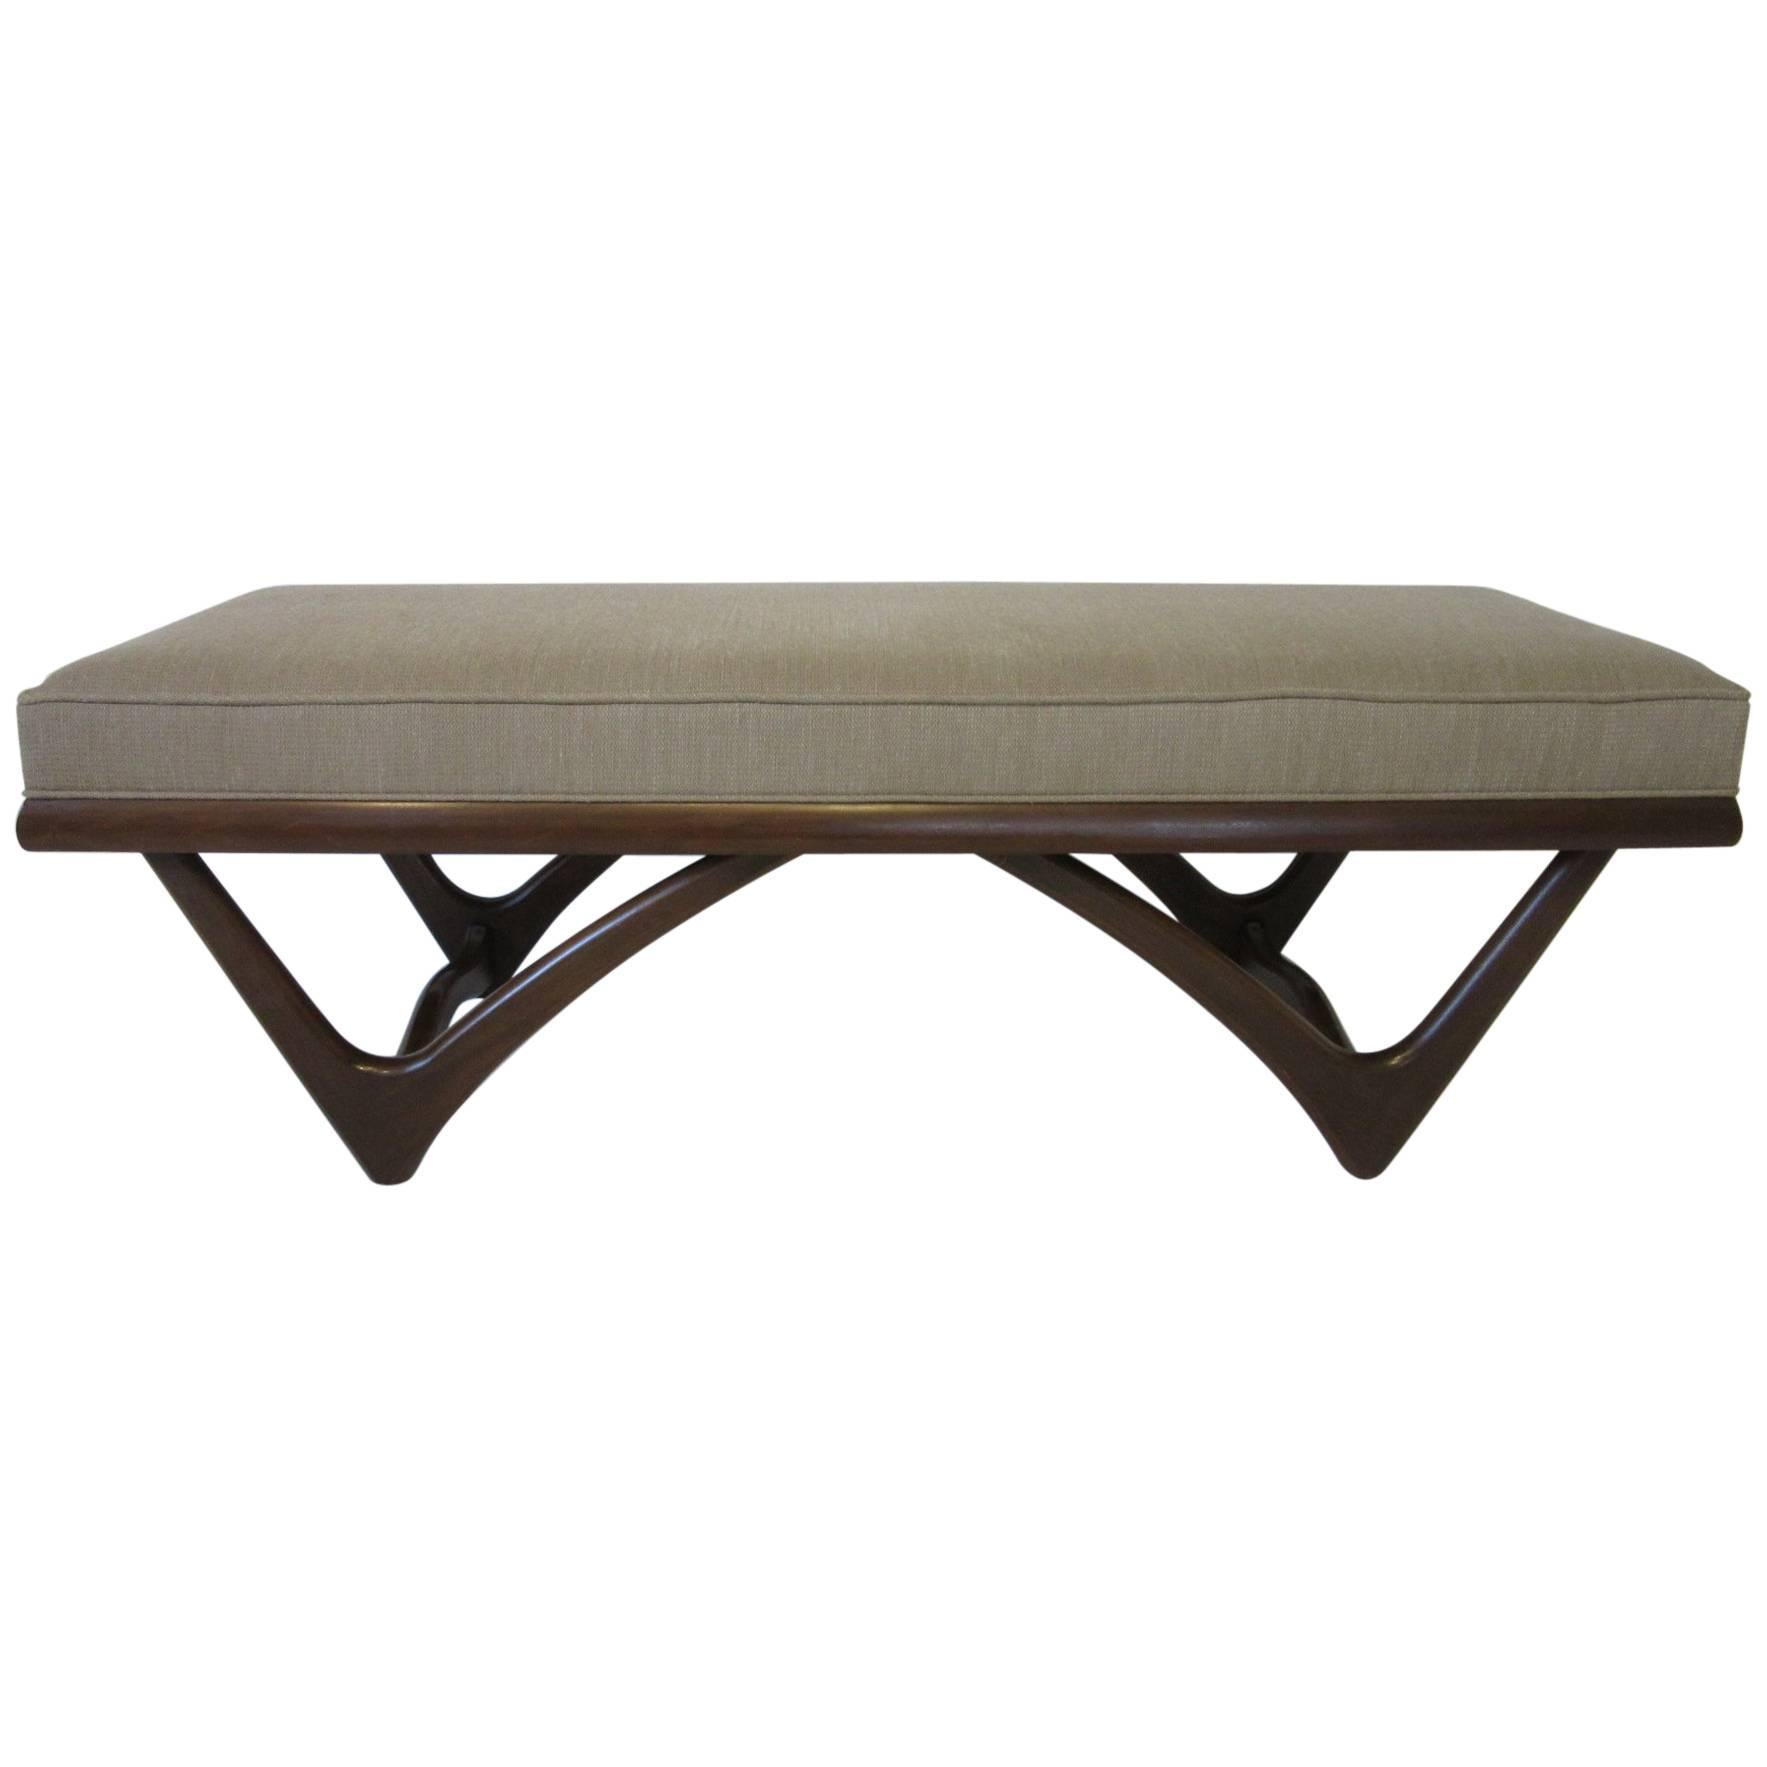 Adrian Pearsall Styled Sculptural Wood Upholstered Bench